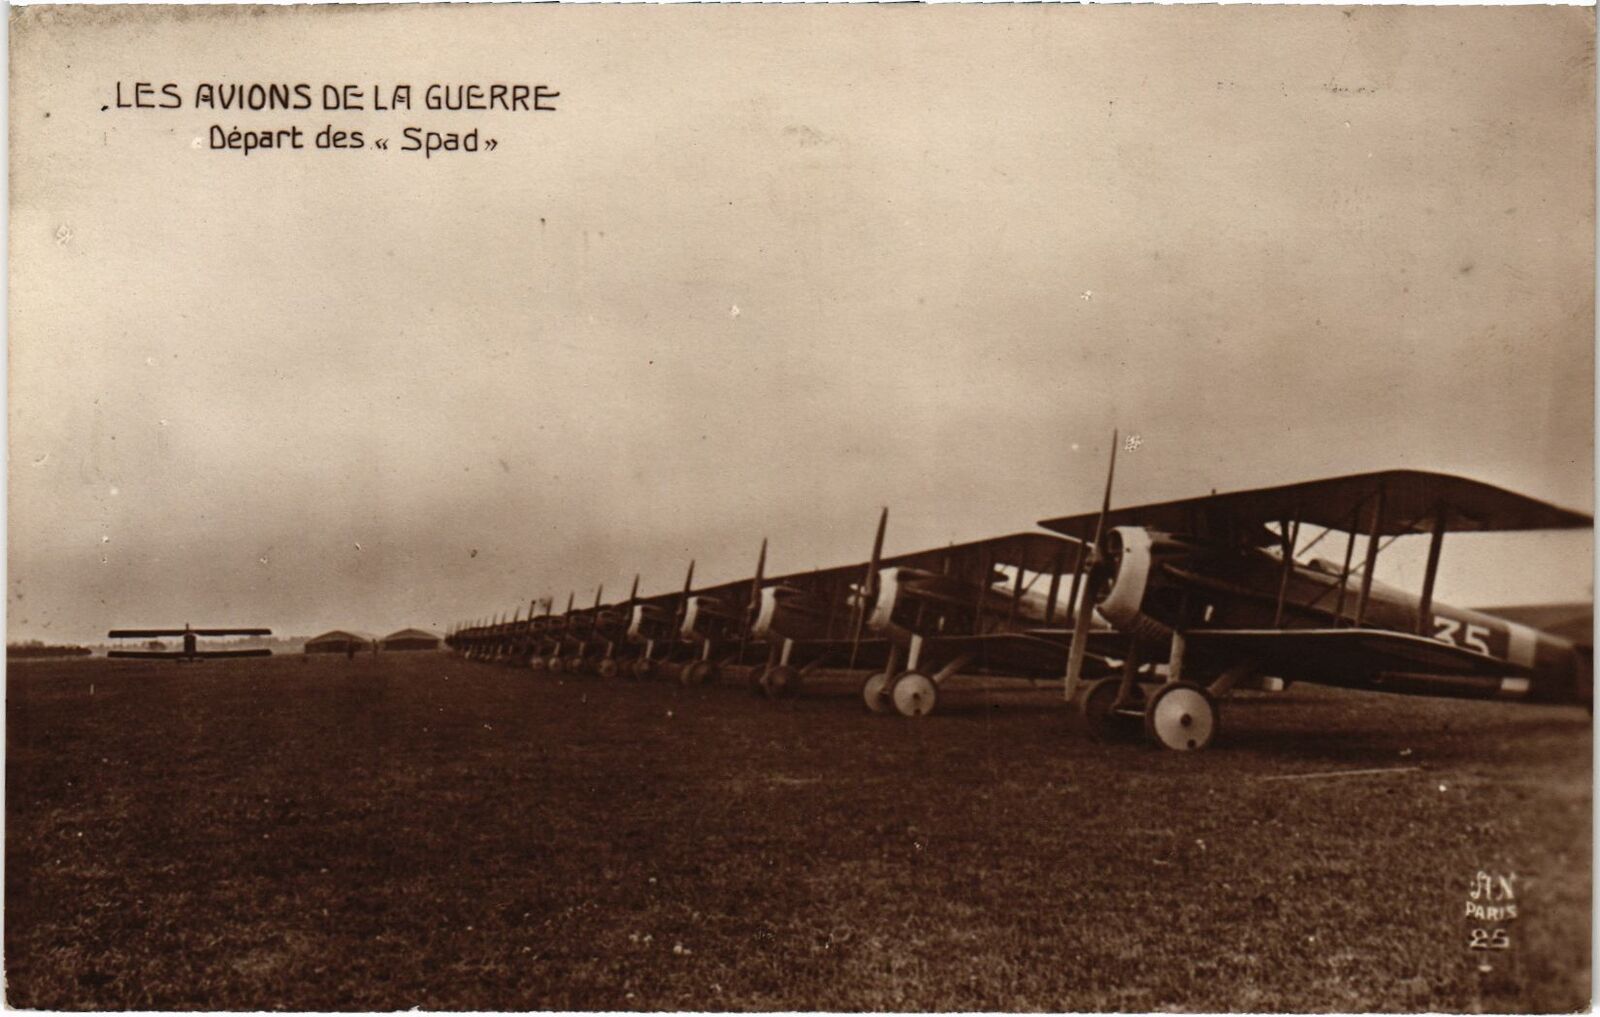 PC AVIATION SPAD MILITAIRE (a54474)